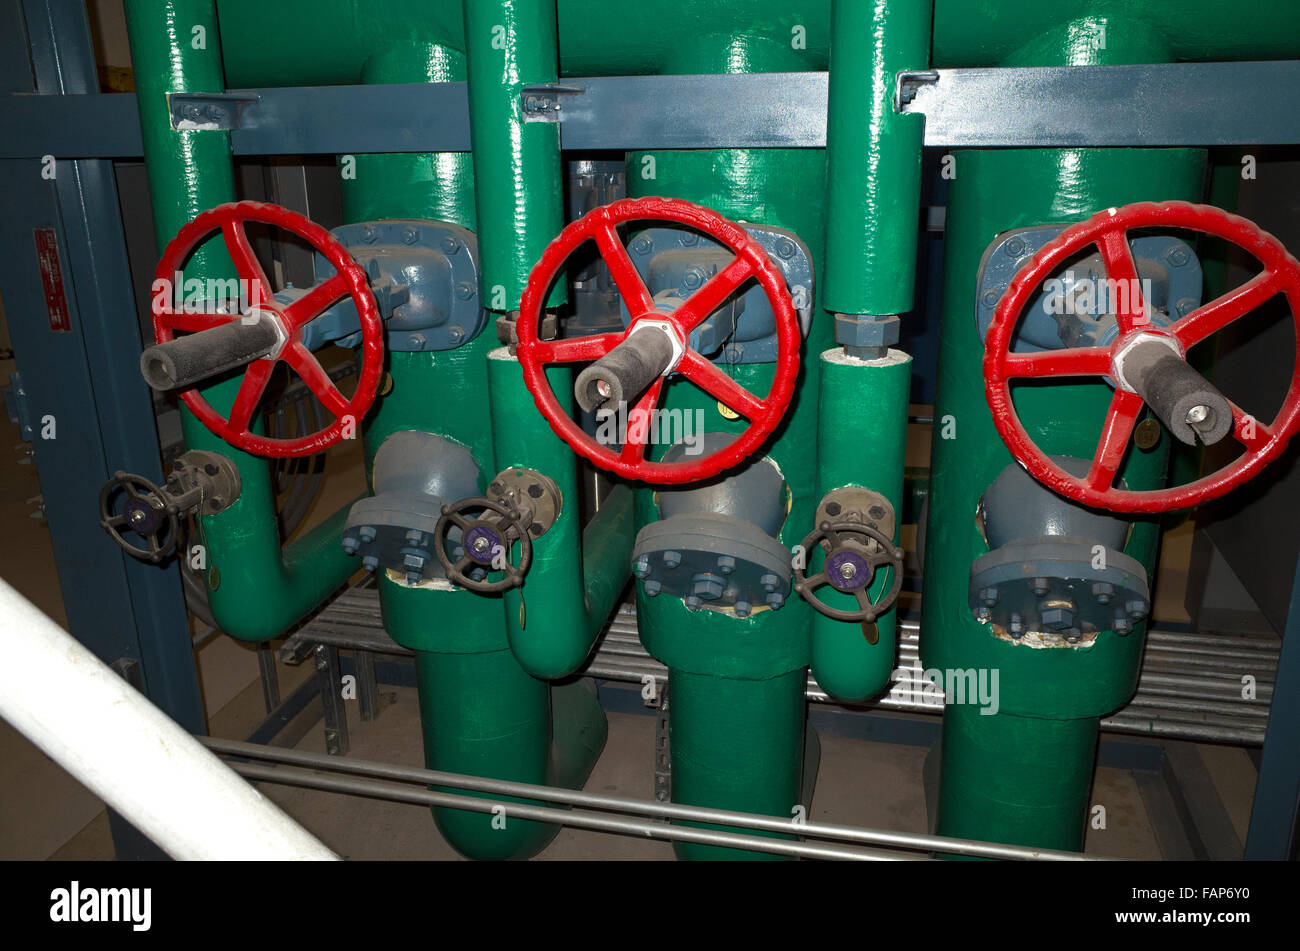 Three large red wheels regulating the heat in large green pipes. Macalester College heating plant. St Paul Minnesota MN USA Stock Photo